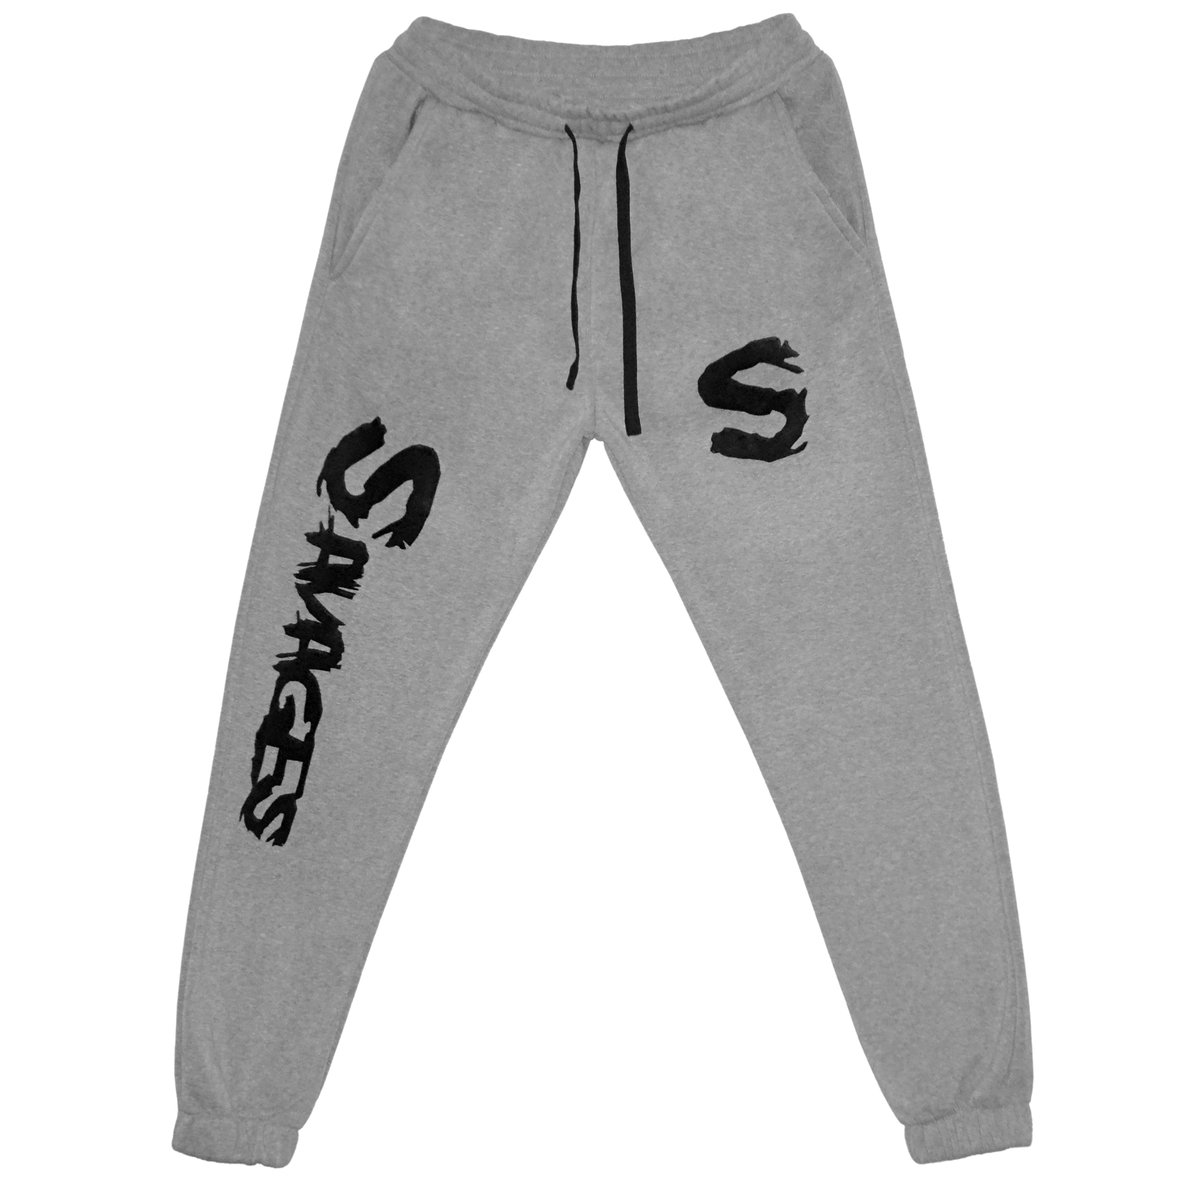 Image of "City of Savages" logo joggers